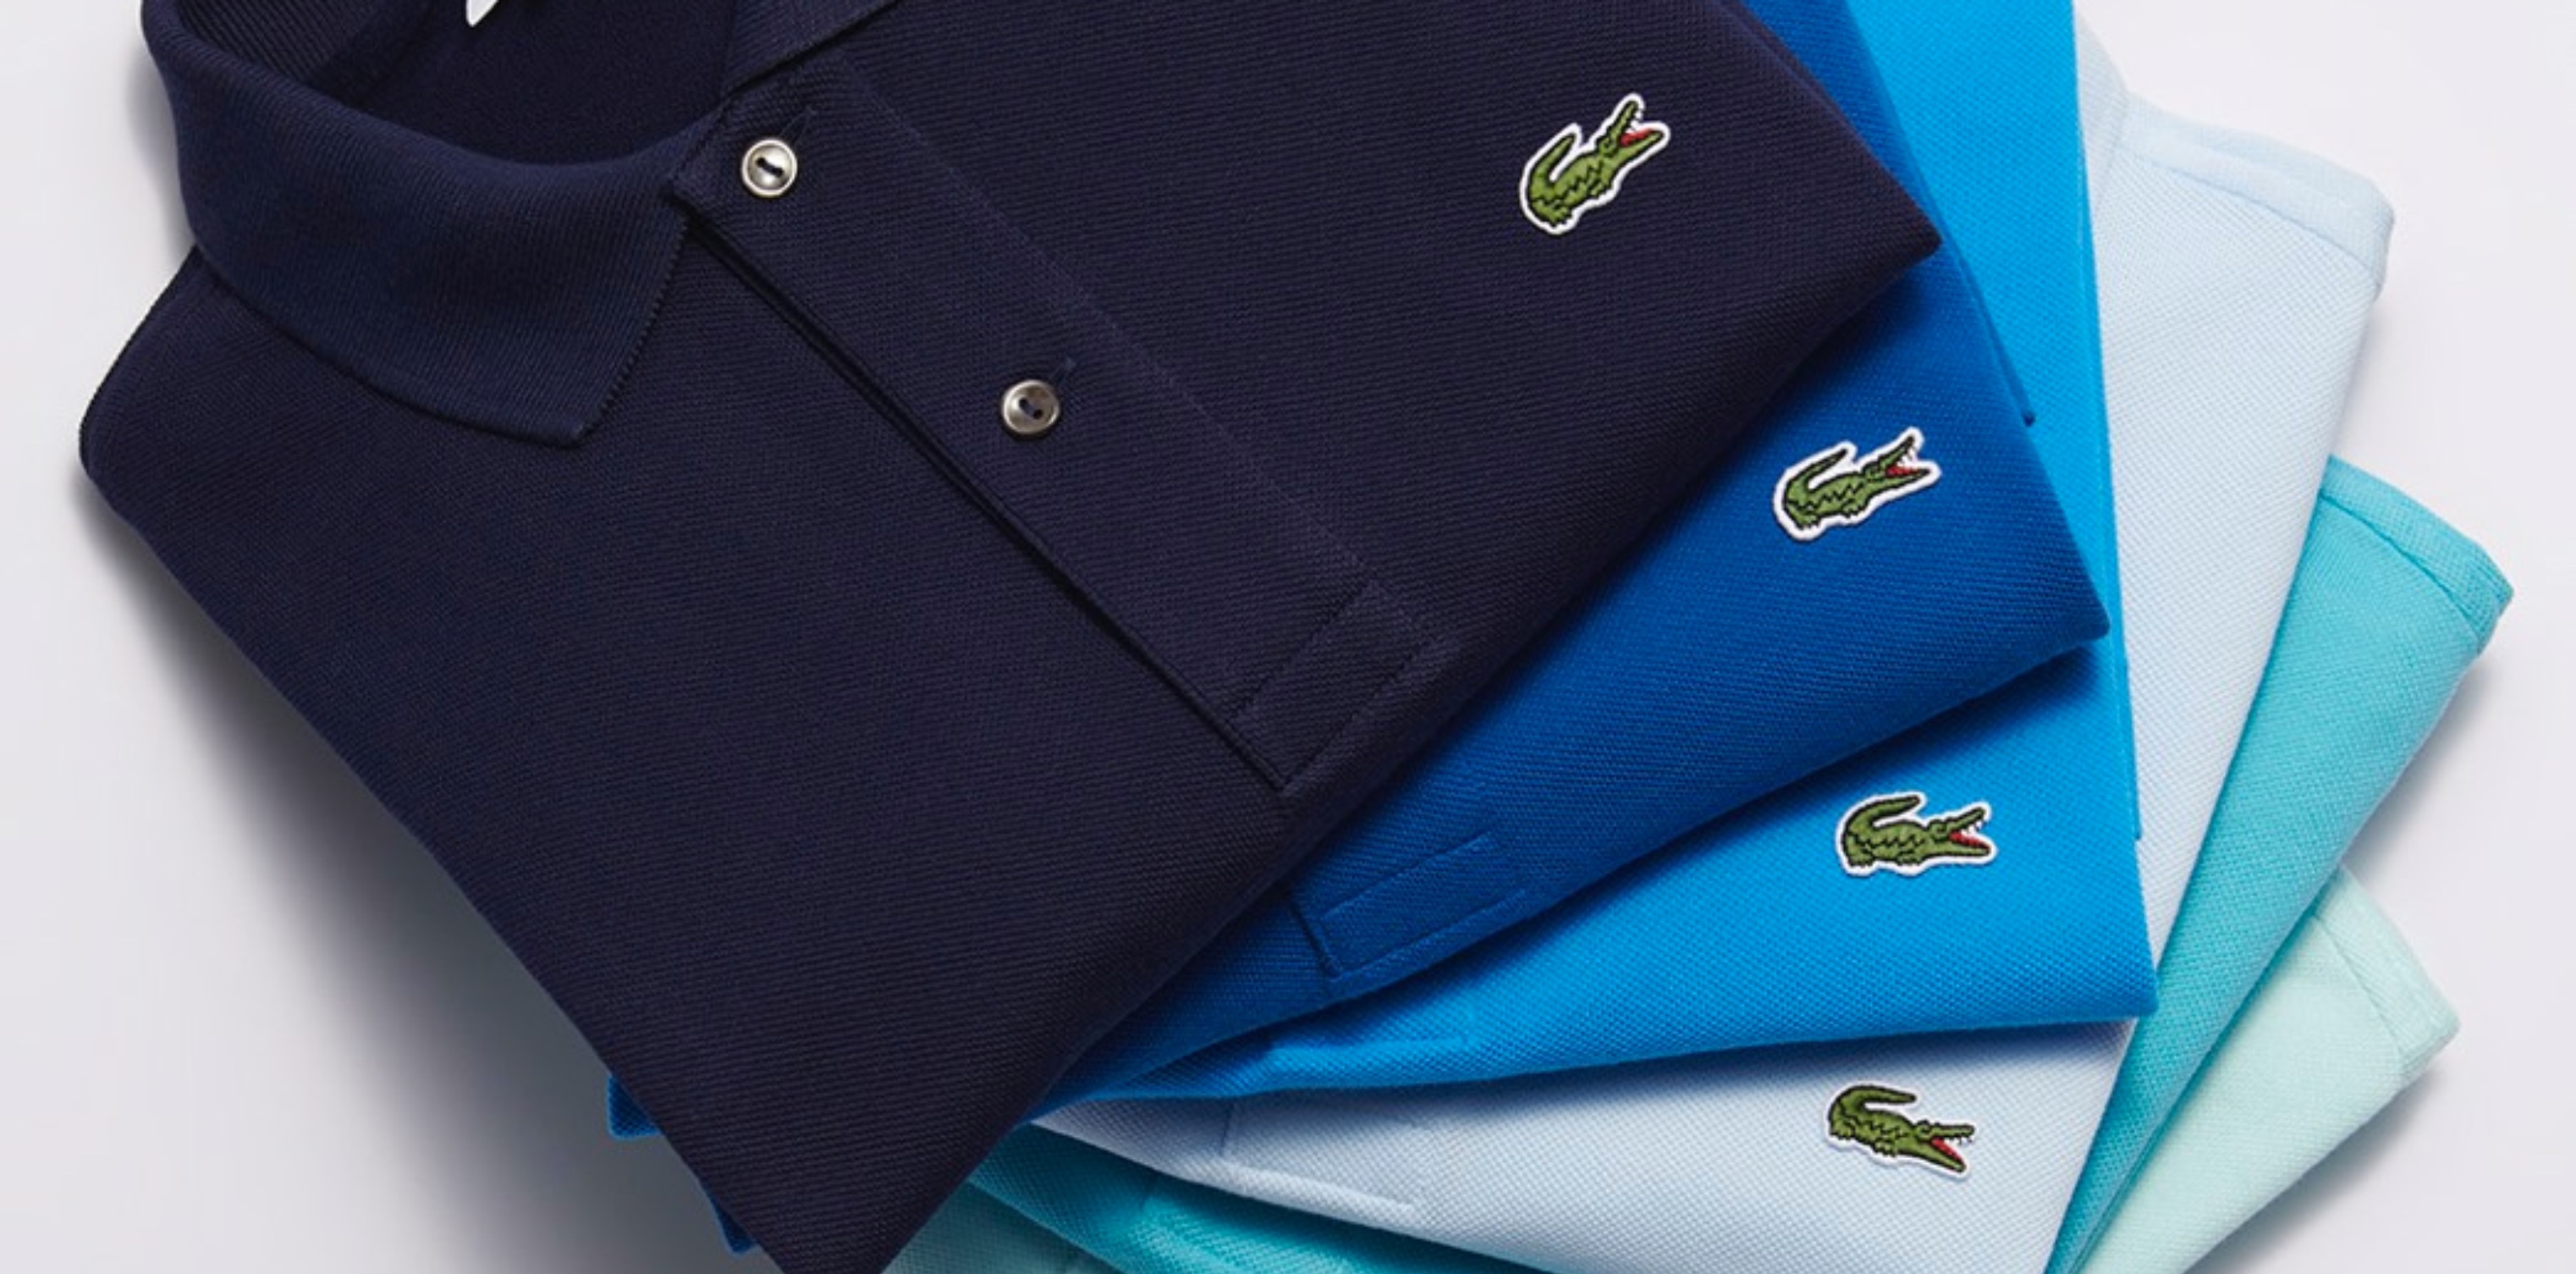 Lacoste Holiday Flash Sale takes up to 50% off including polos, sweatshirts, more